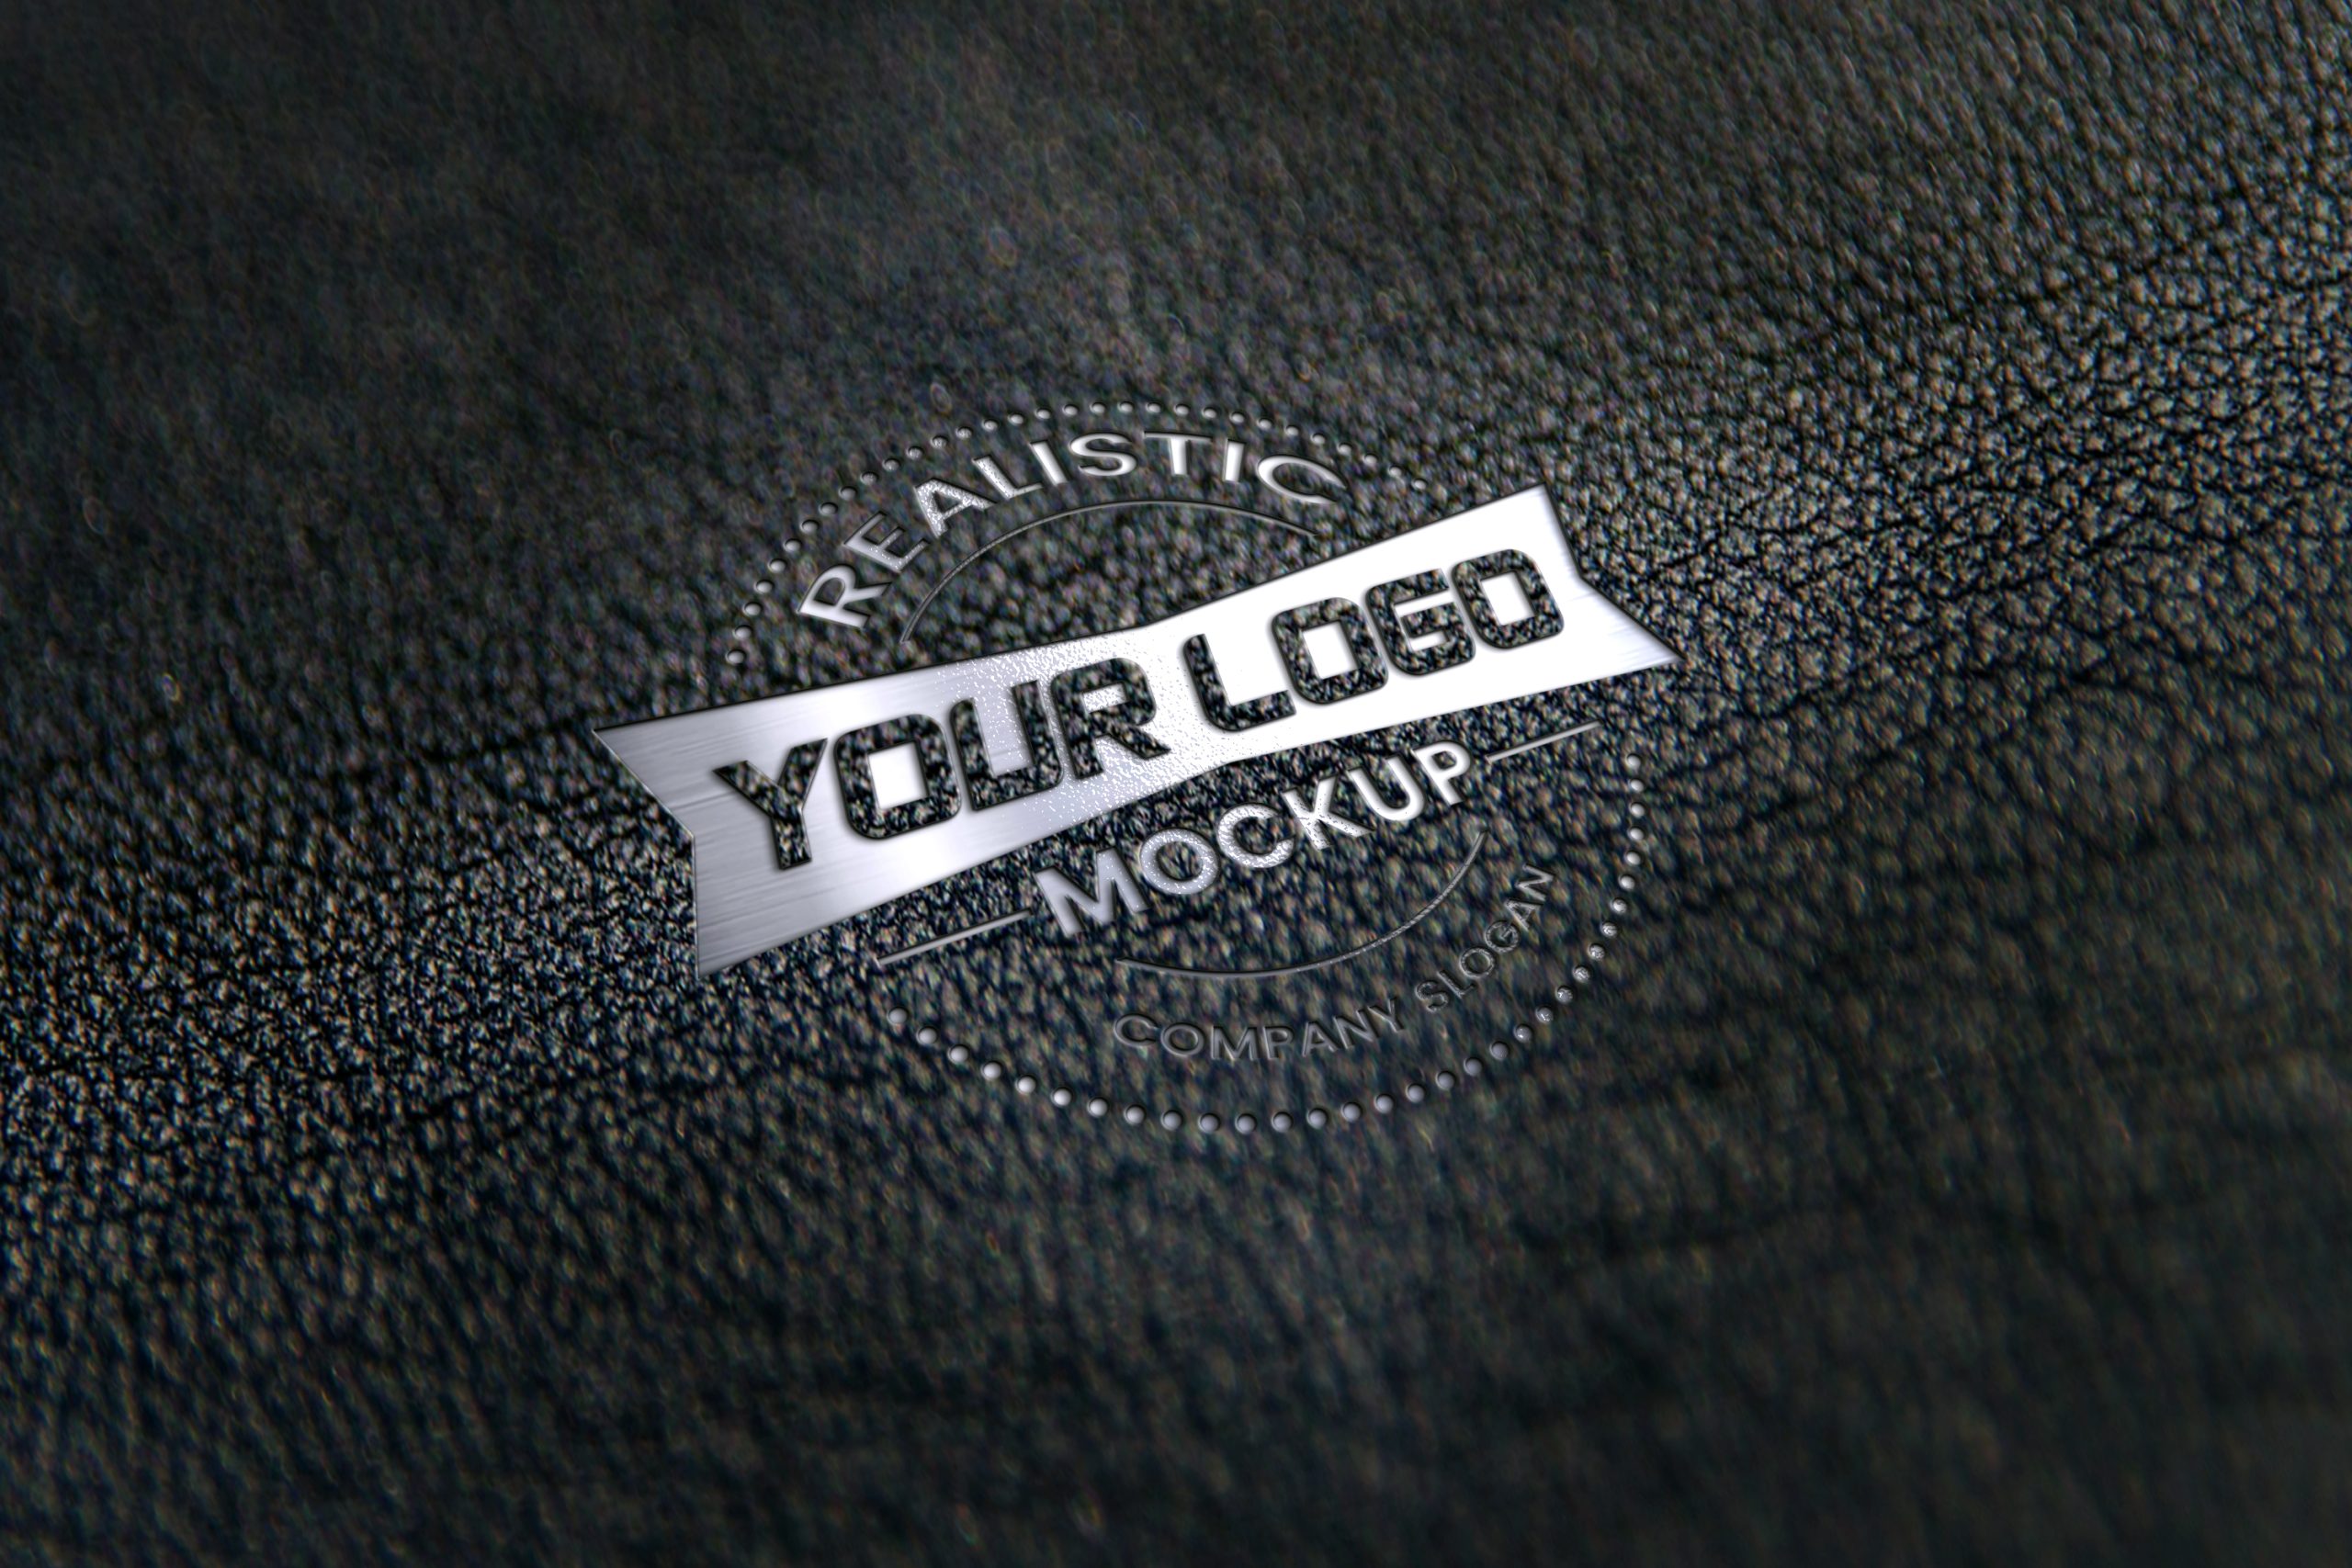 Free Embossed Logo Mockup with Water Drops – GraphicsFamily